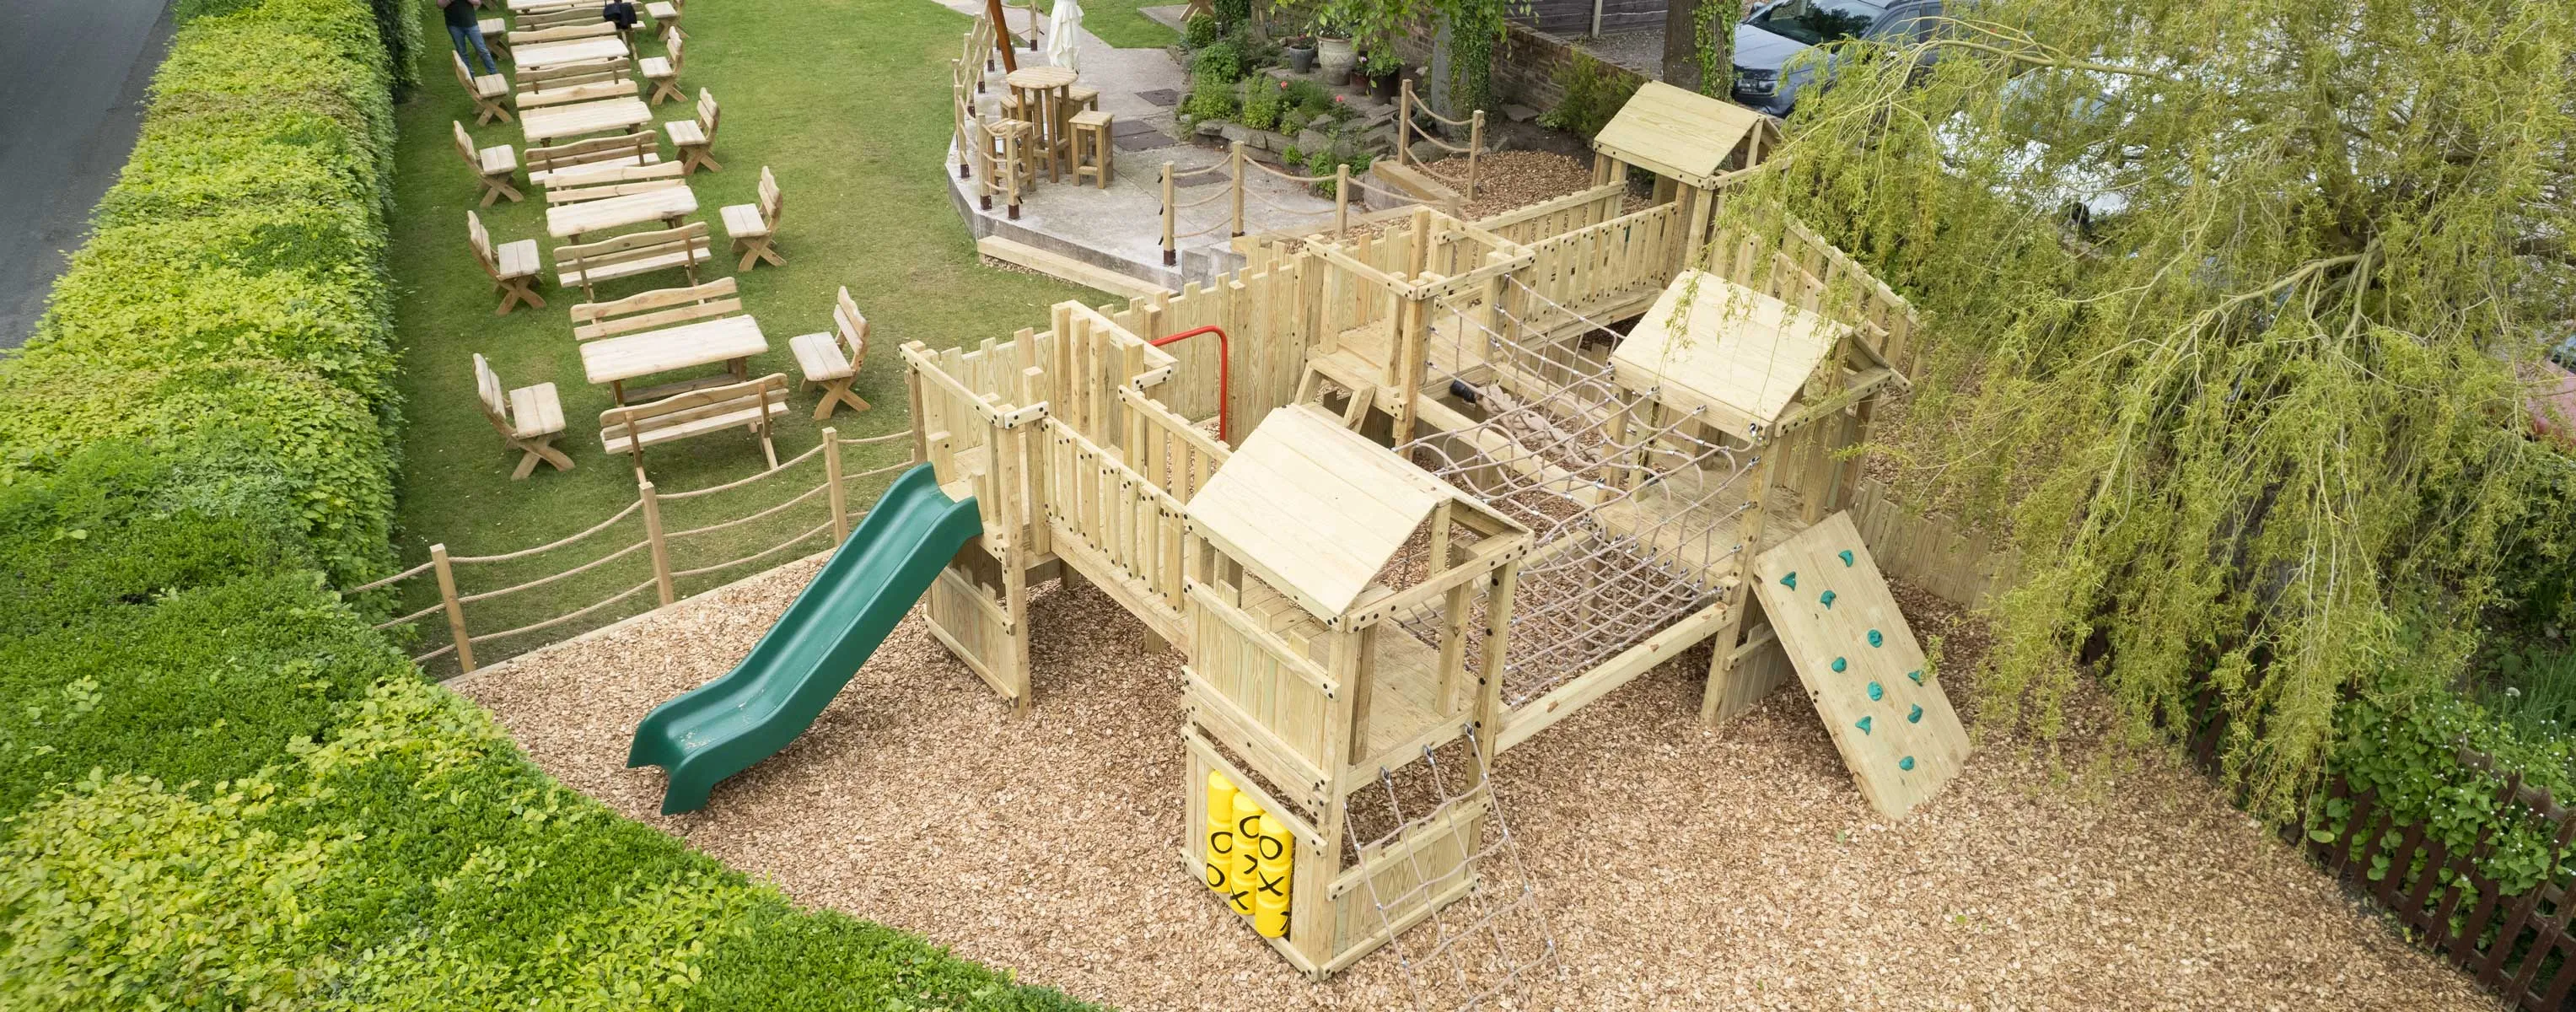 Leisure business playgrounds